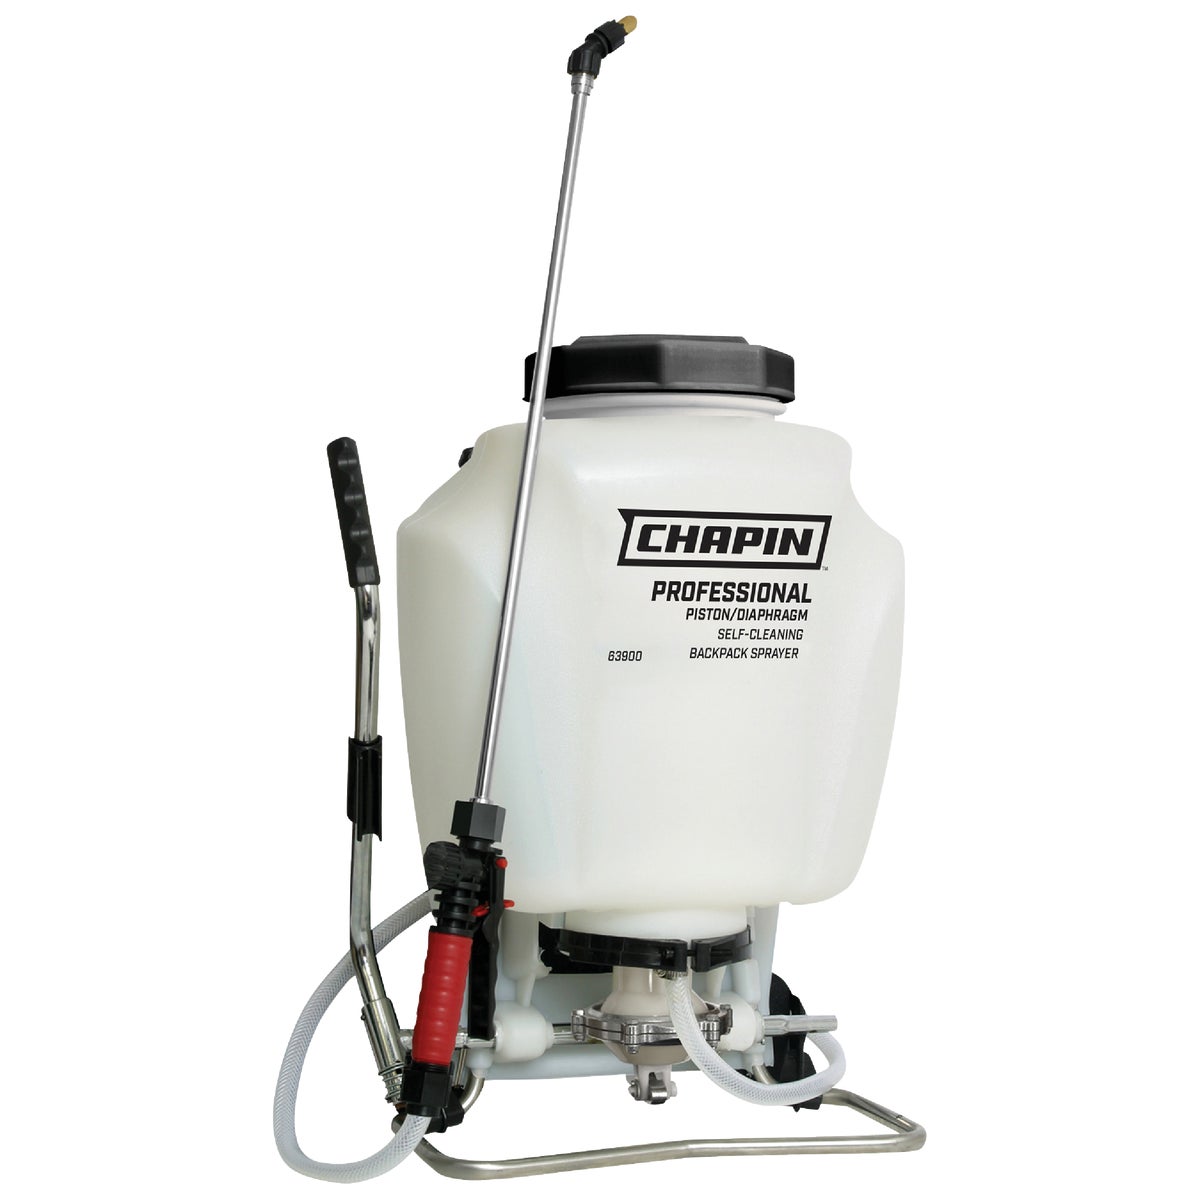 Item 702199, Commercial duty backpack sprayer features combined piston and diaphragm 